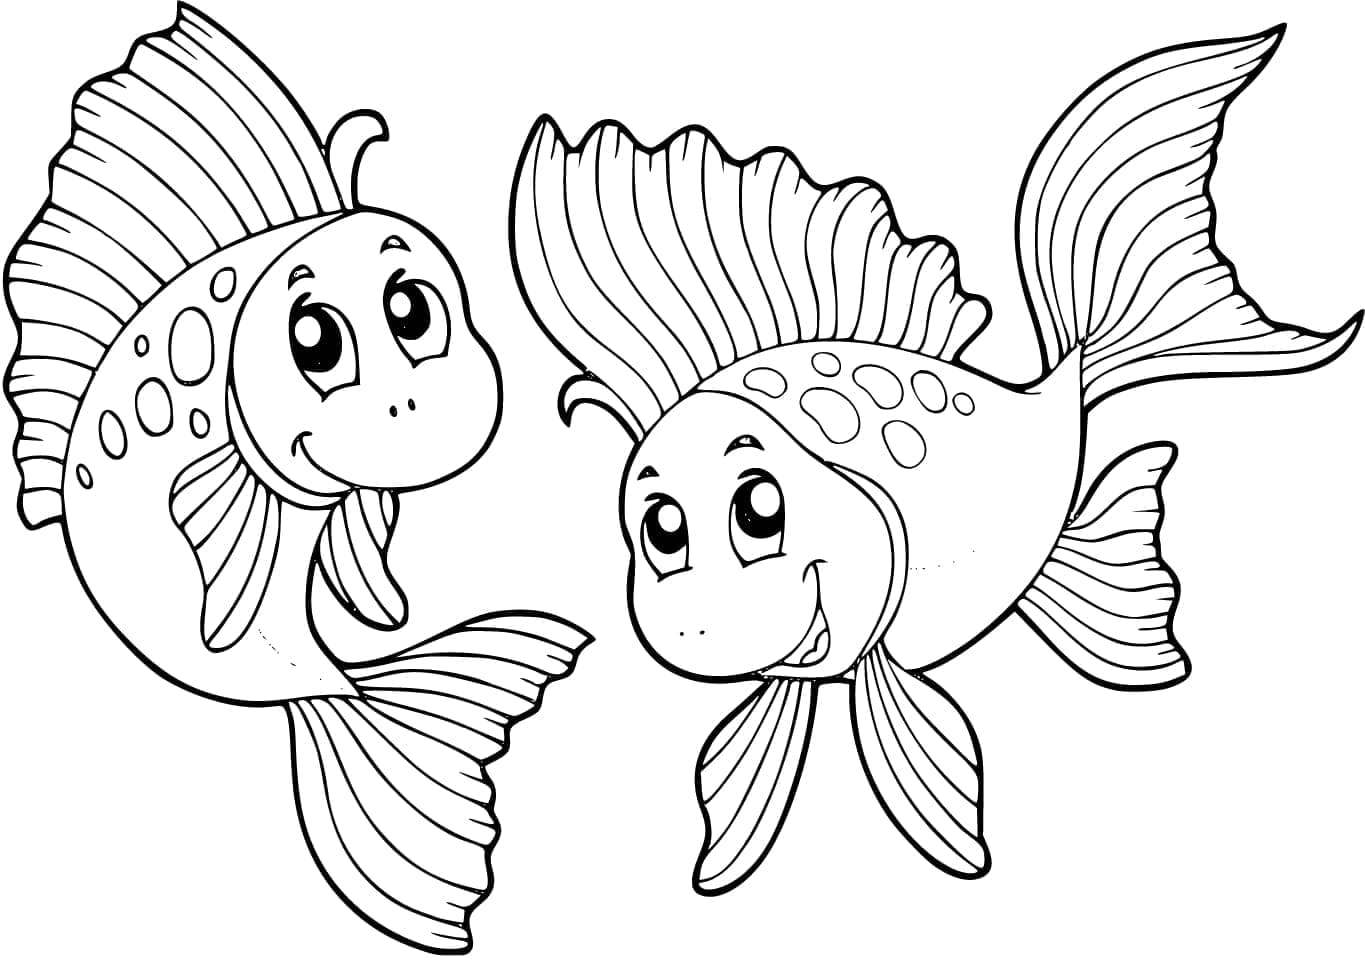 Poissons Rouges Mignons coloring page